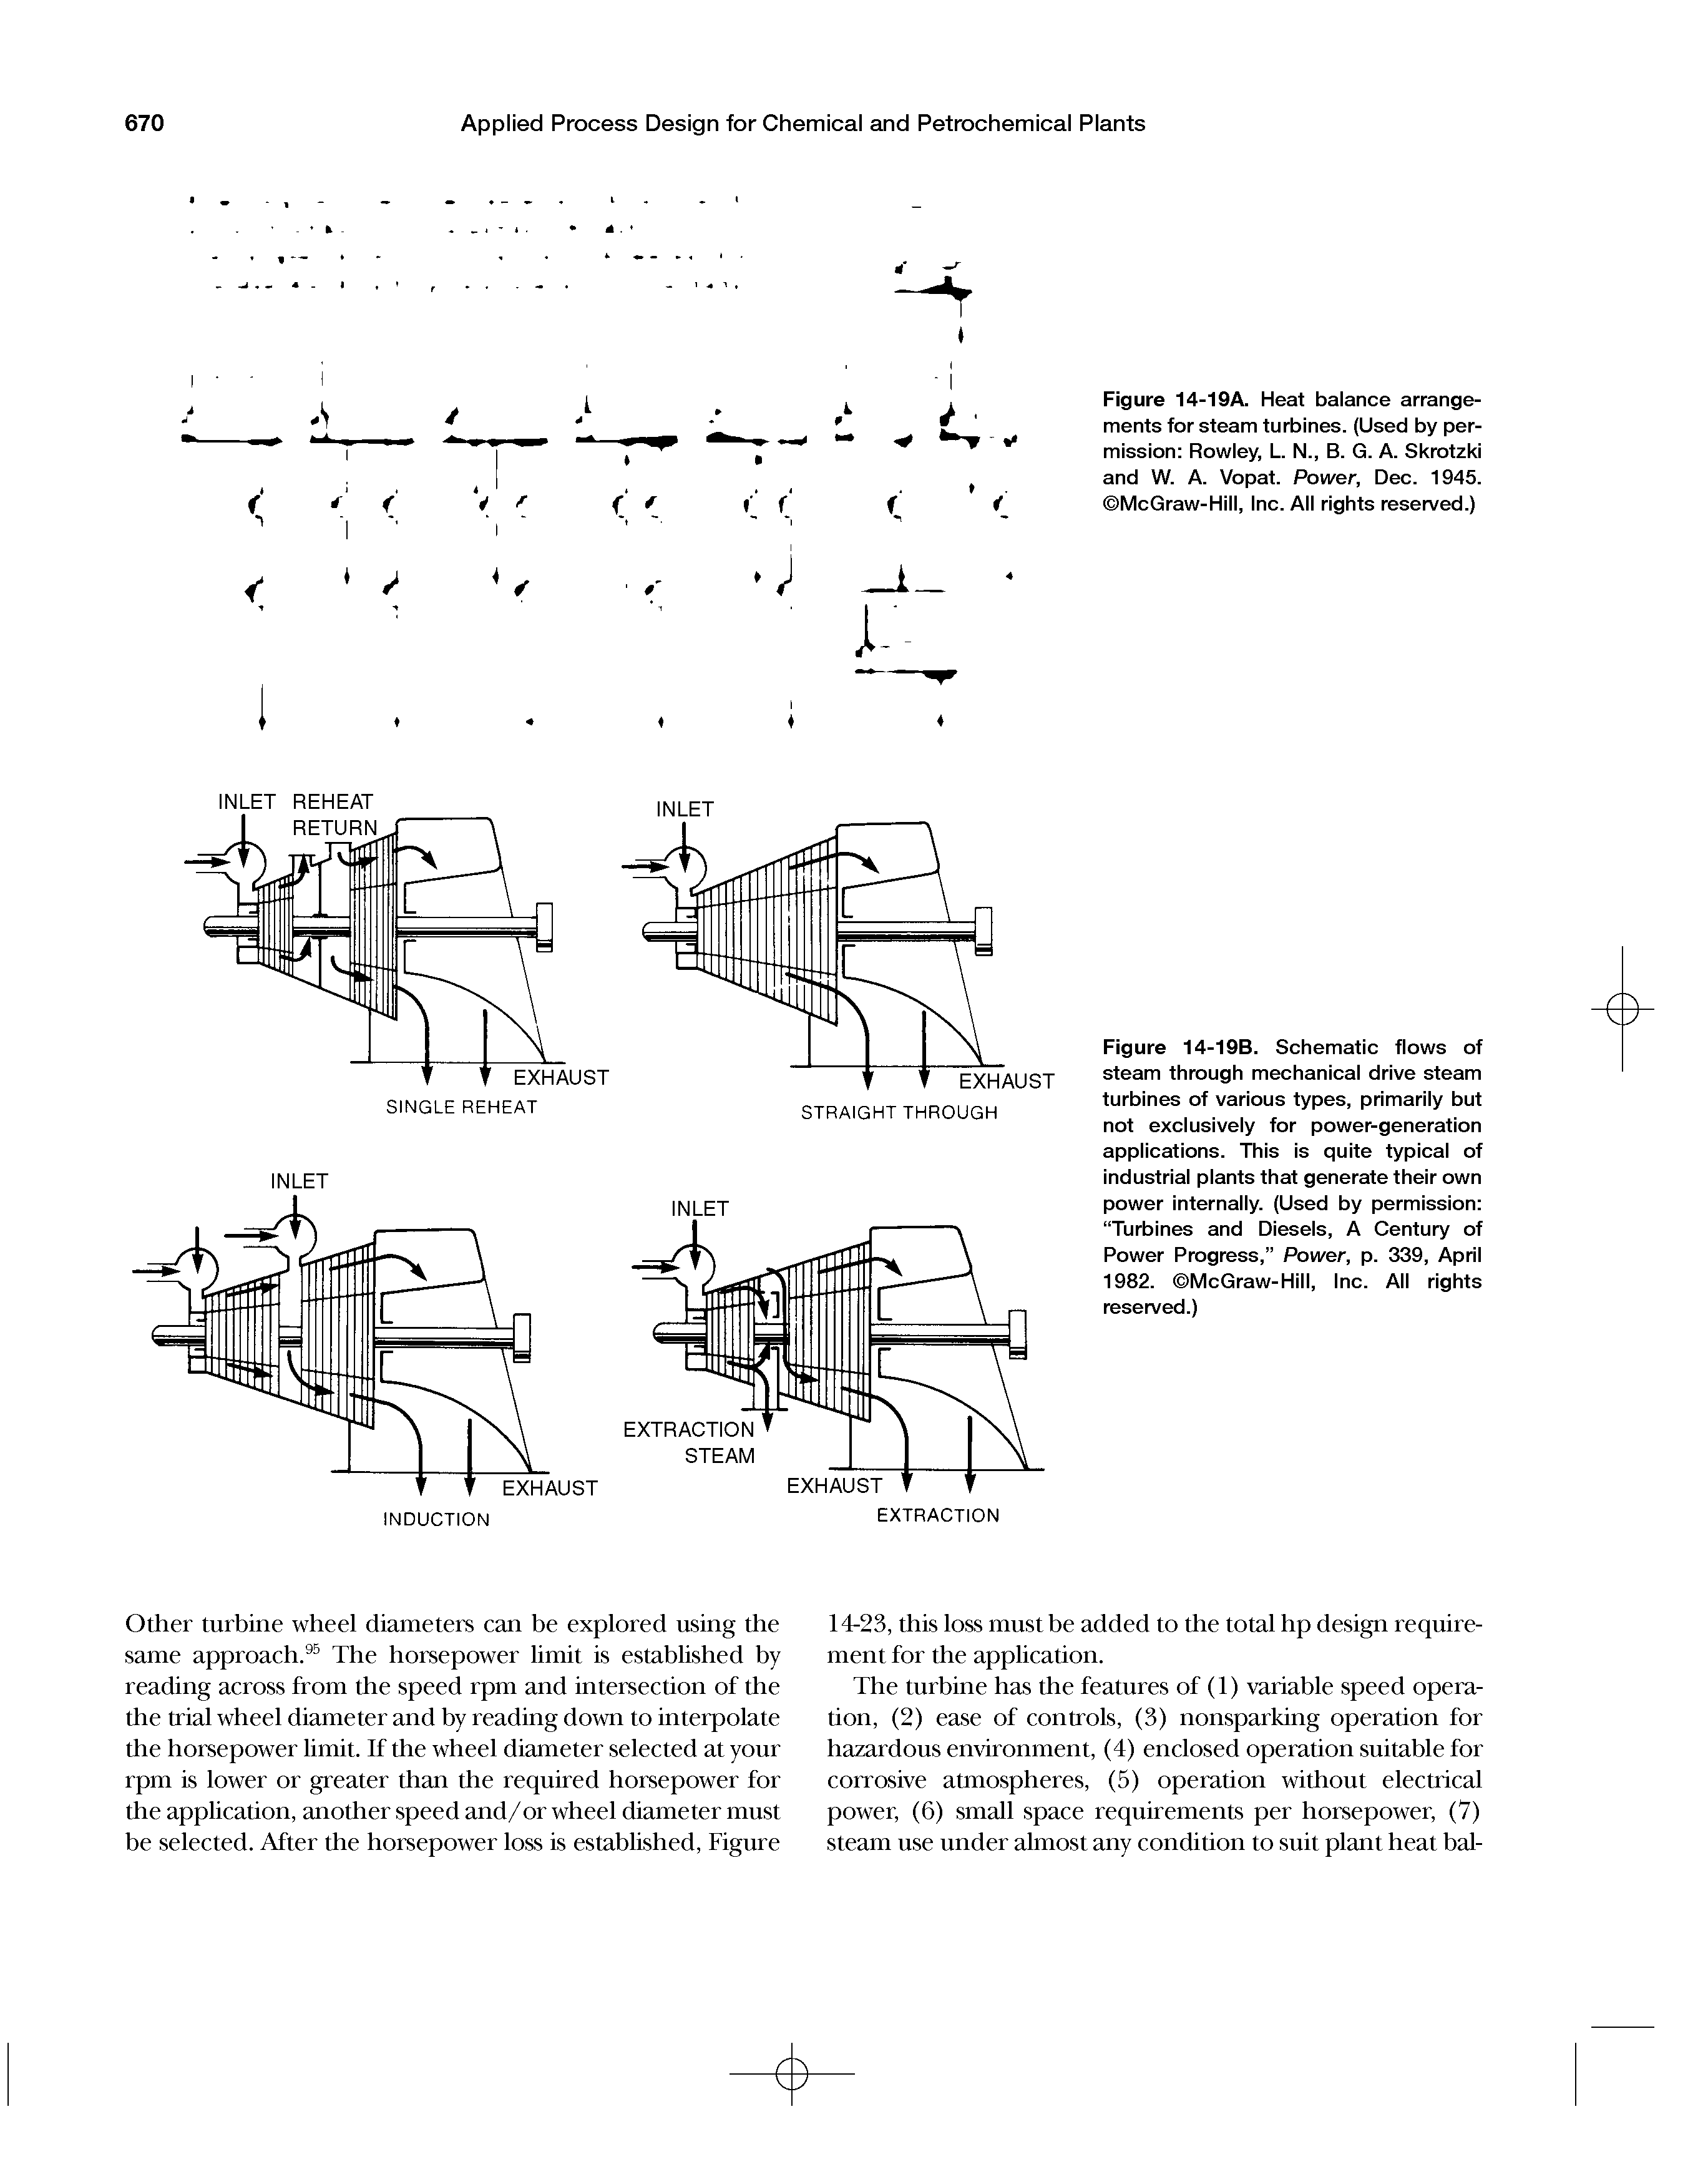 Figure 14-19B. Schematic flows of steam through mechanical drive steam turbines of various types, primarily but not exclusively for power-generation applications. This is quite typical of industrial plants that generate their own power internally. (Used by permission Turbines and Diesels, A Century of Power Progress, Power, p. 339, April 1982. McGraw-Hill, Inc. All rights reserved.)...